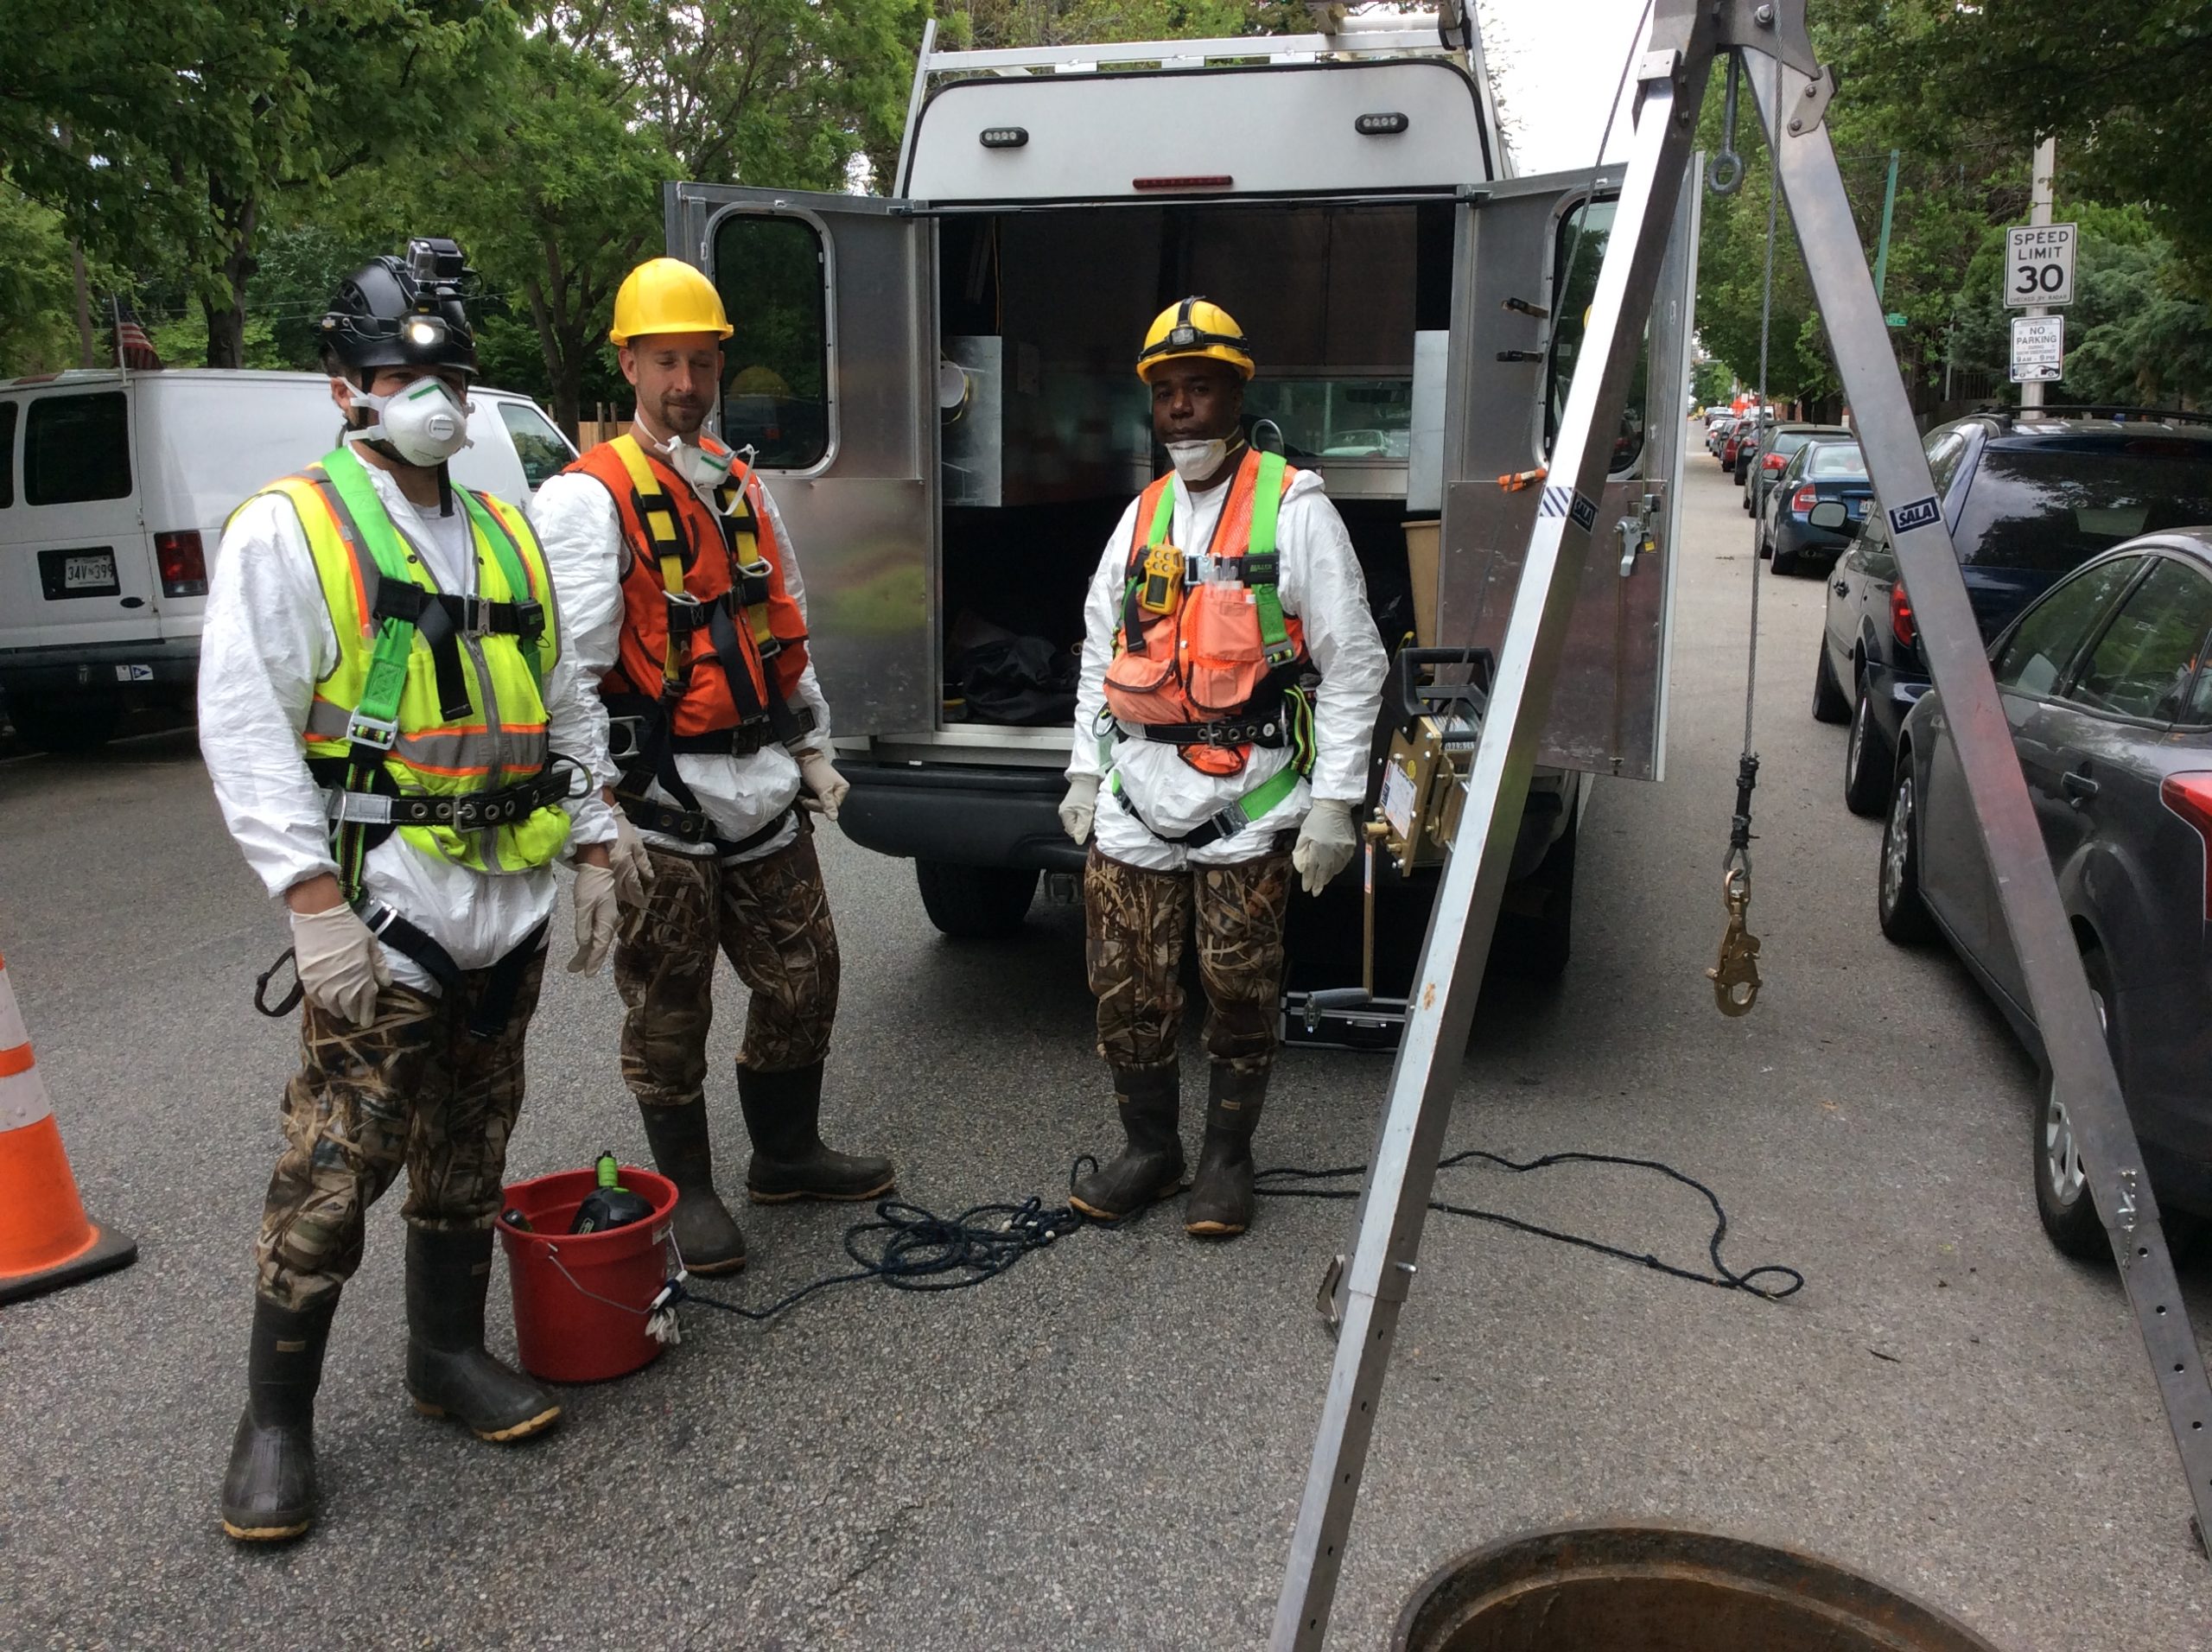 two men in safety gear standing next to a truck